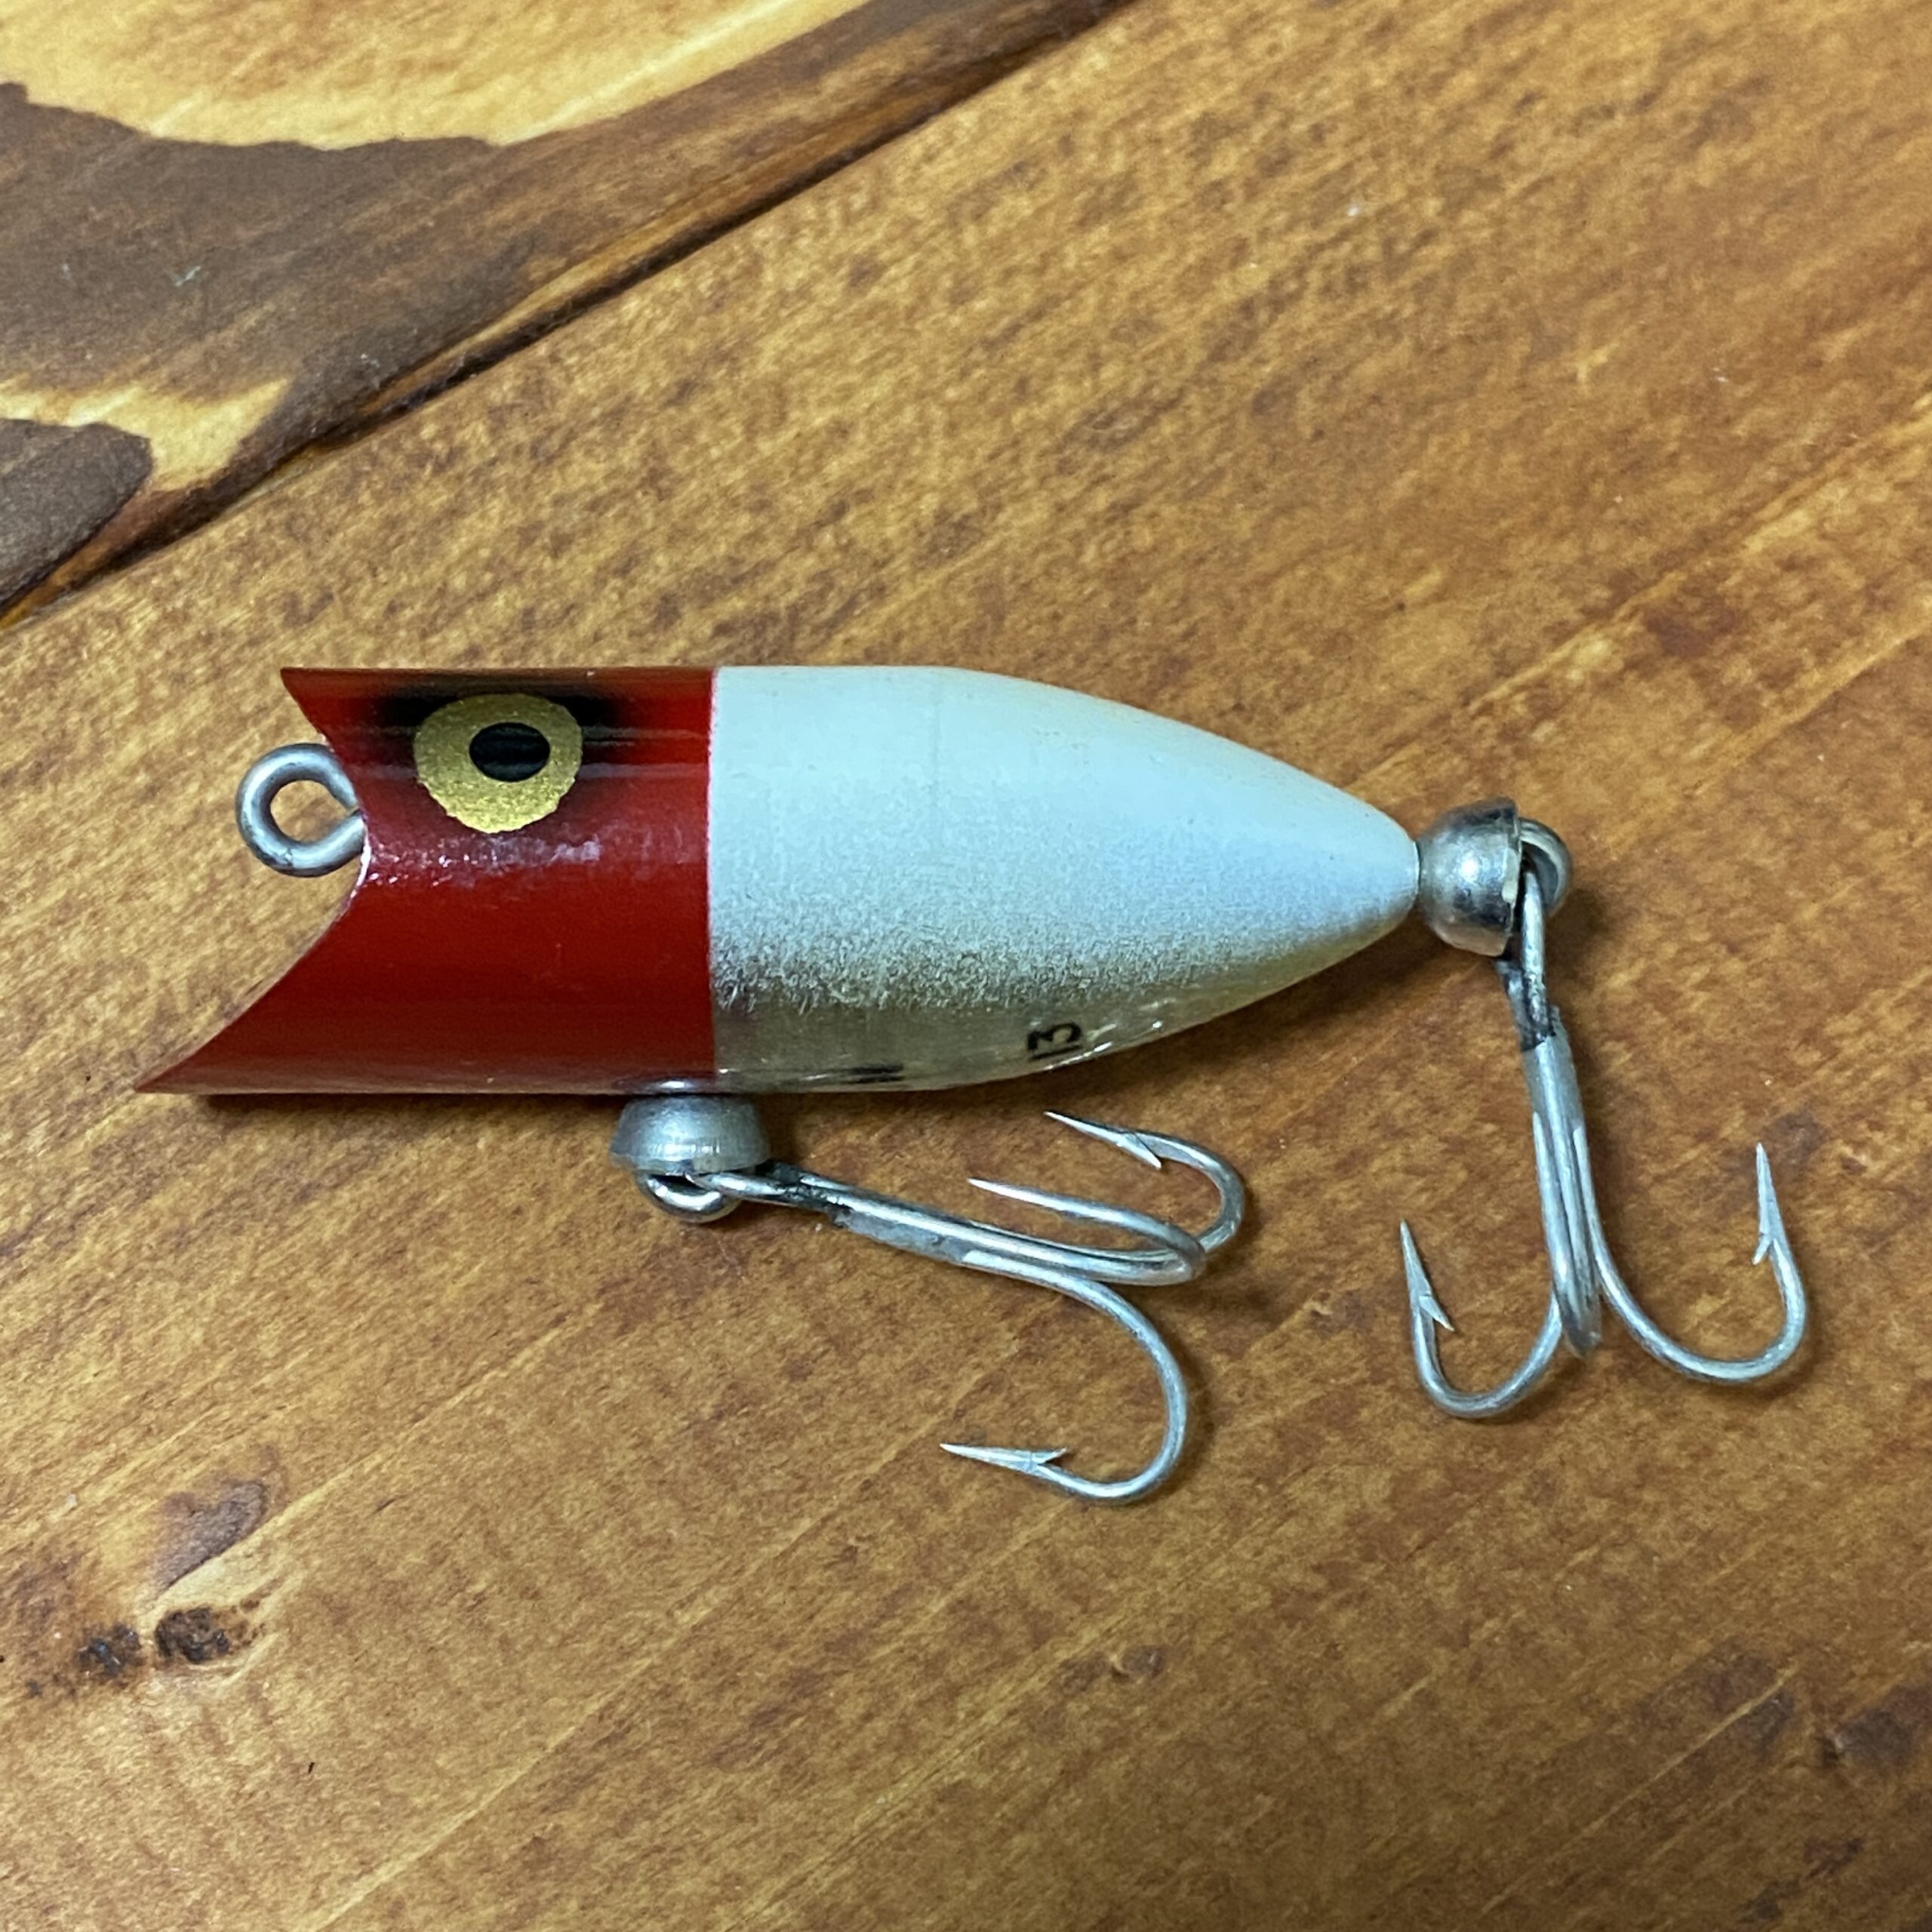 Heddon Tiny Lucky13 #370 | オールドルアーのコト | OLD tackle blog